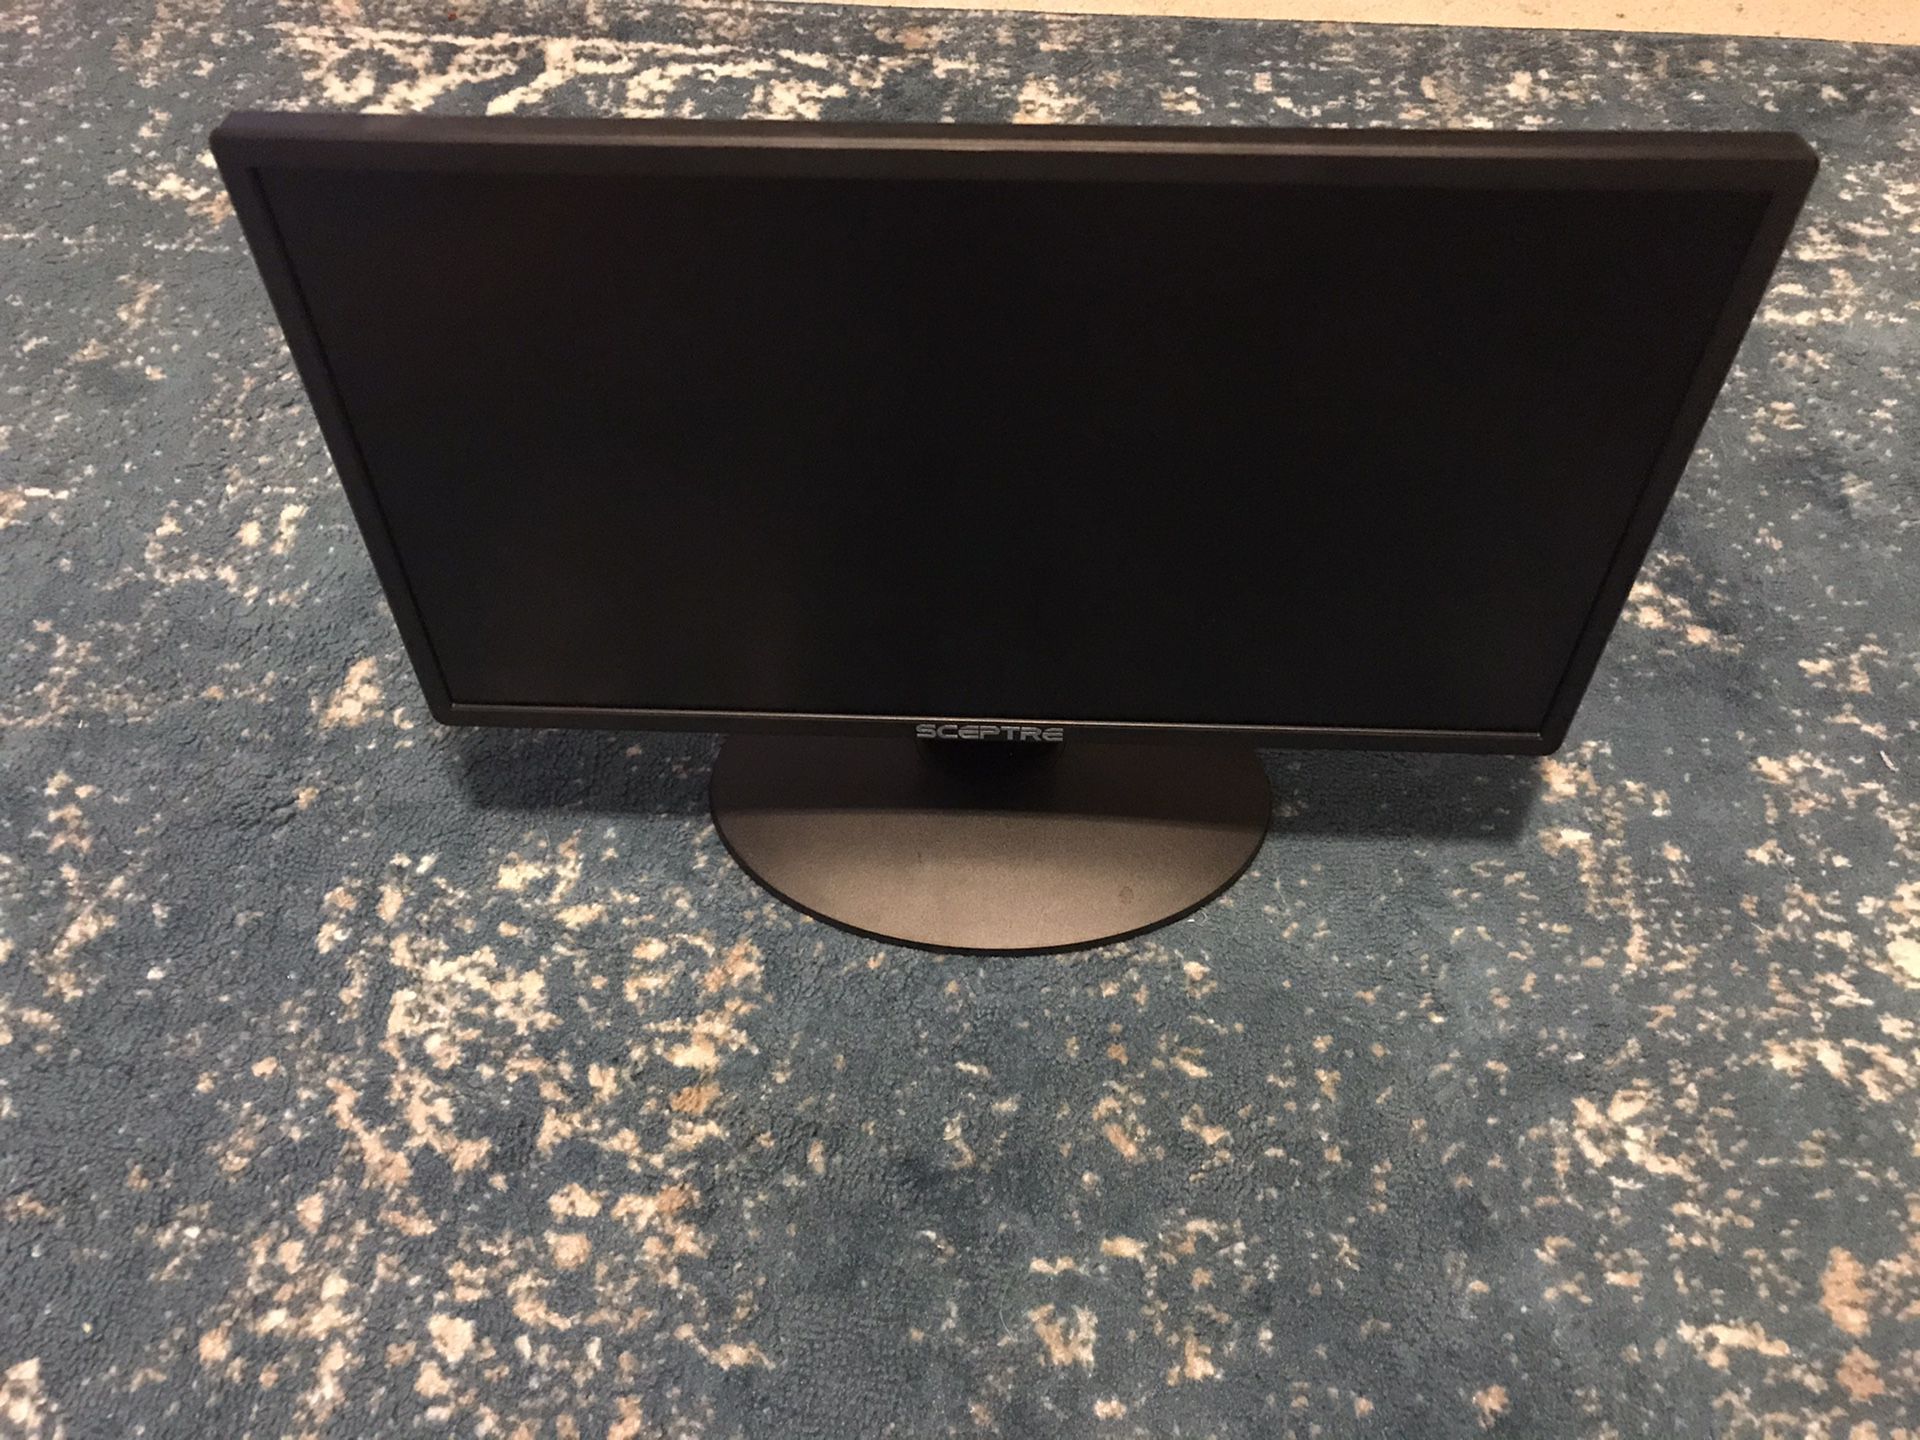 Scepter 20 inch monitor like new